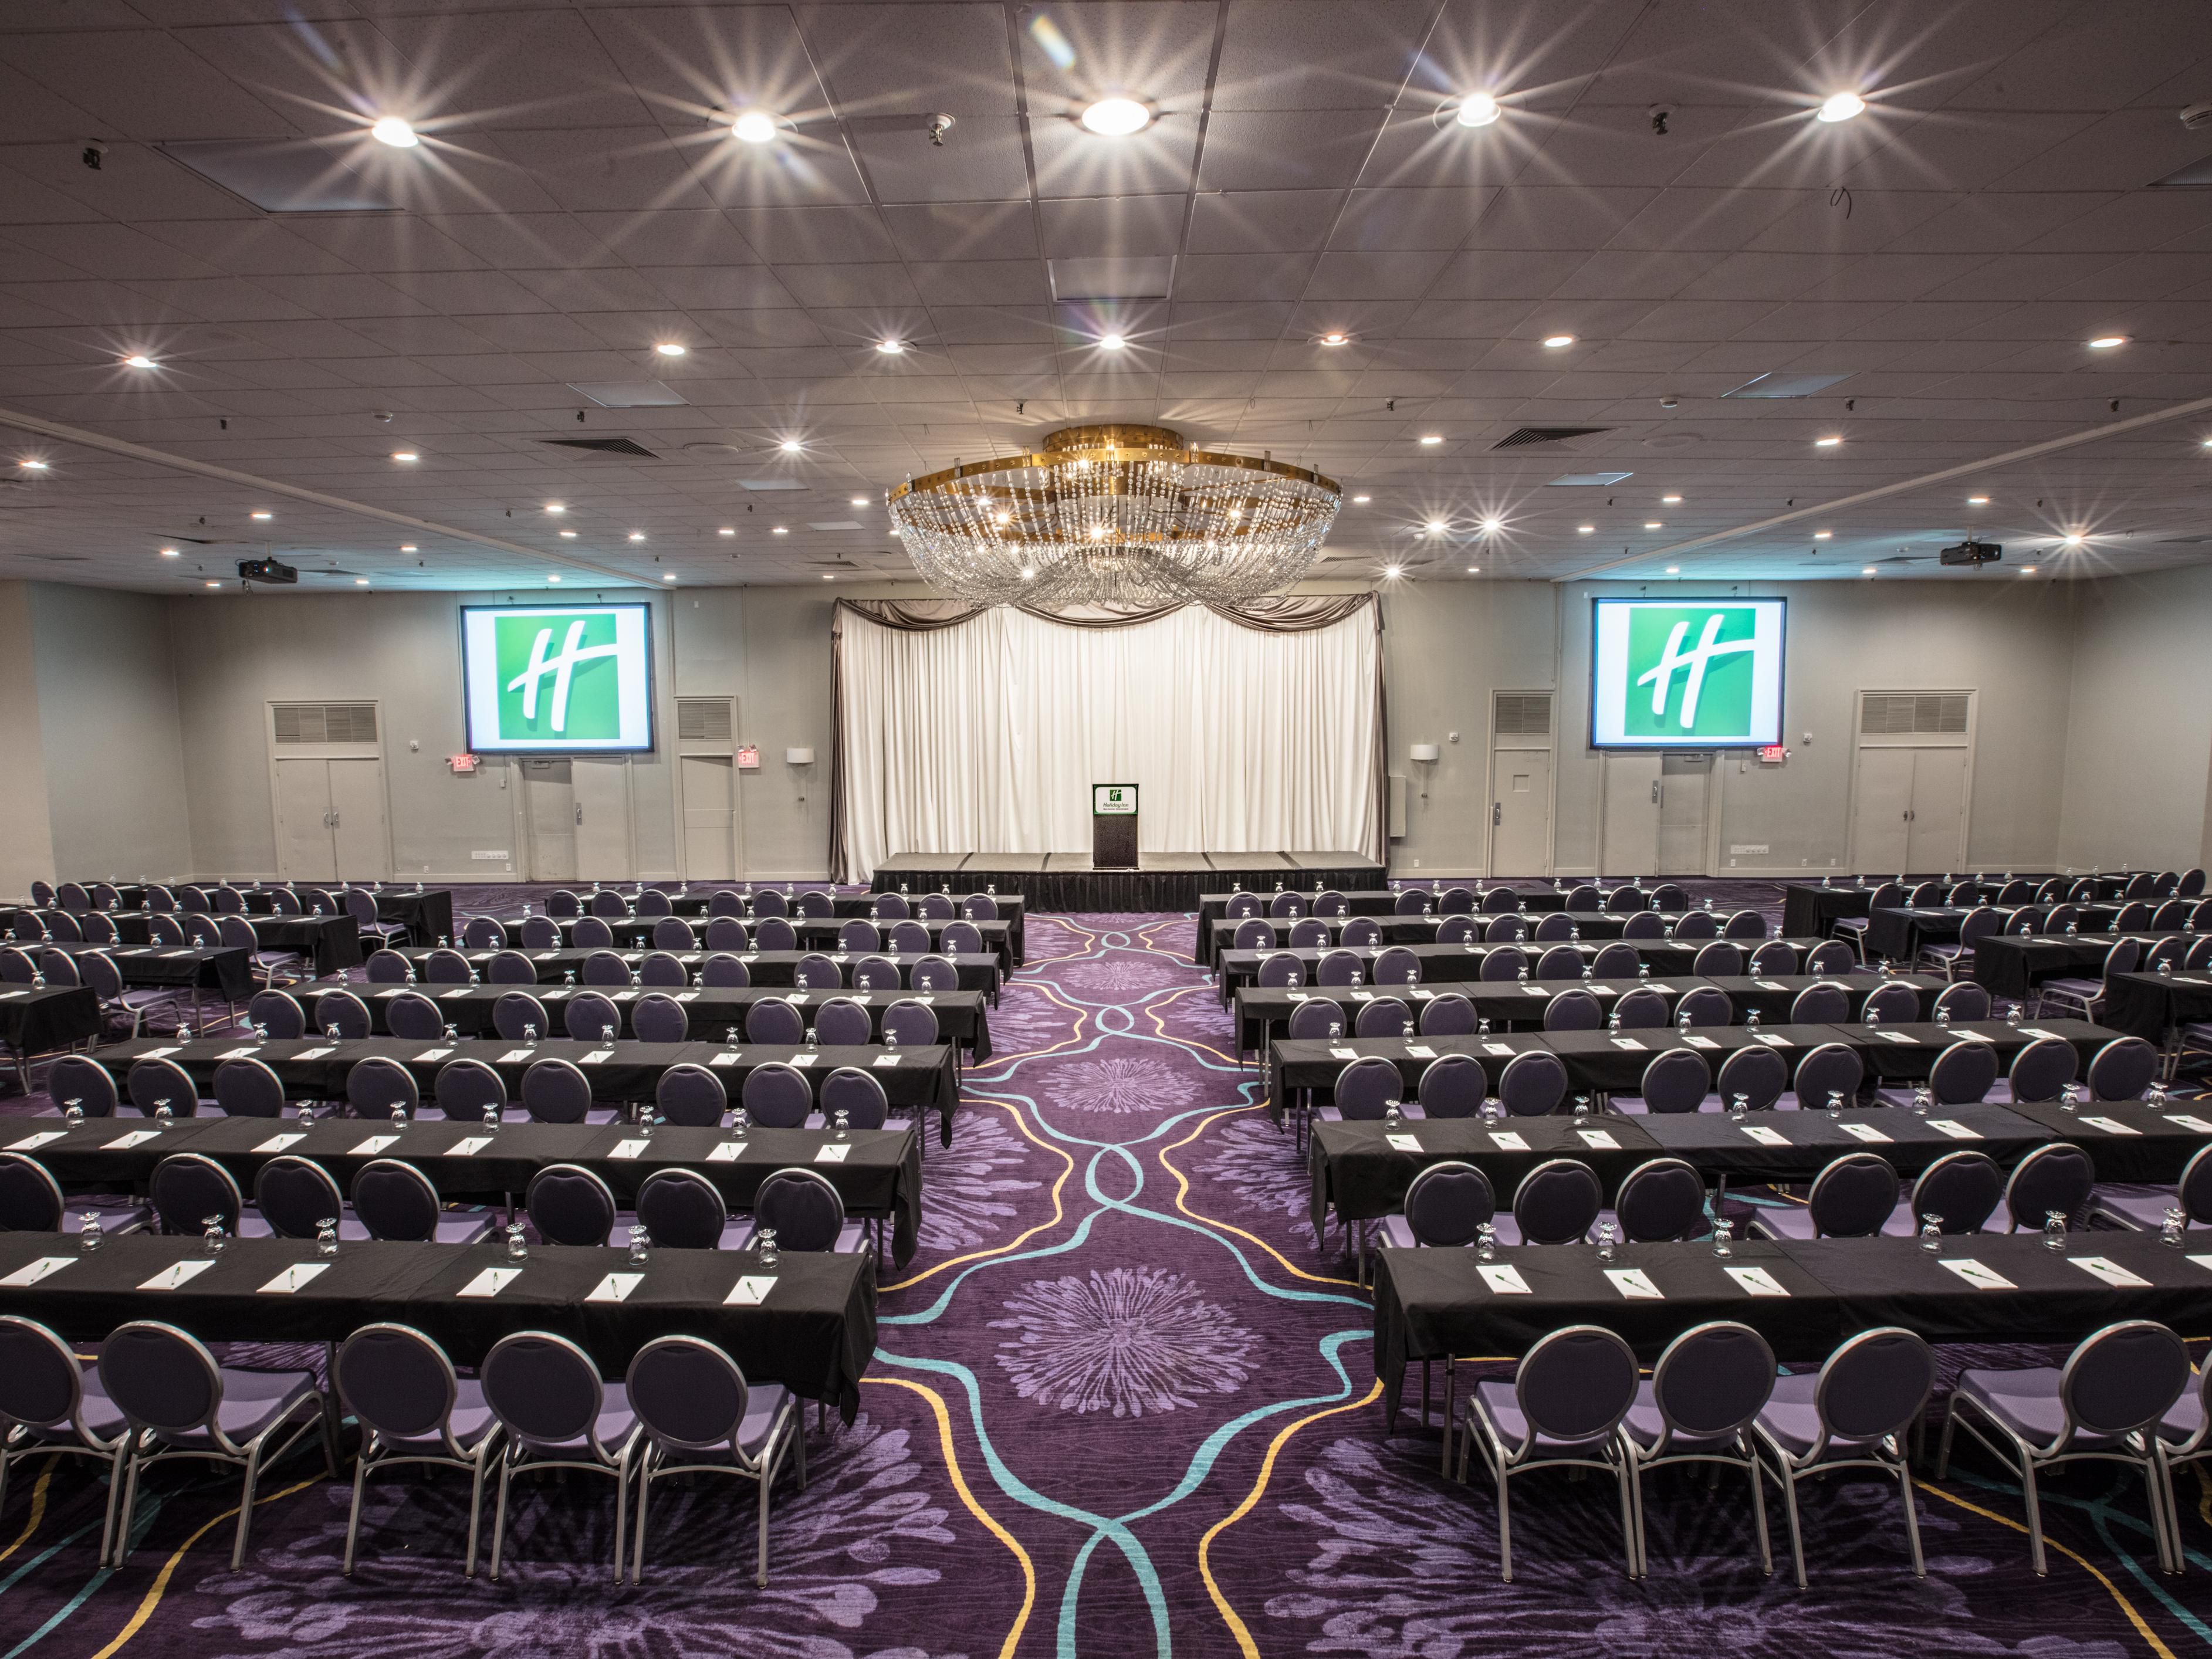 The hotel is home to our Grand Ballroom plus breakout spaces and can host groups from 5 to 500. Be sure to check out our Lobby Level Boardroom seating up to 12 guests with all natural light. Our seasoned sales team will be there from concept to completion to ensure your meeting is a success.